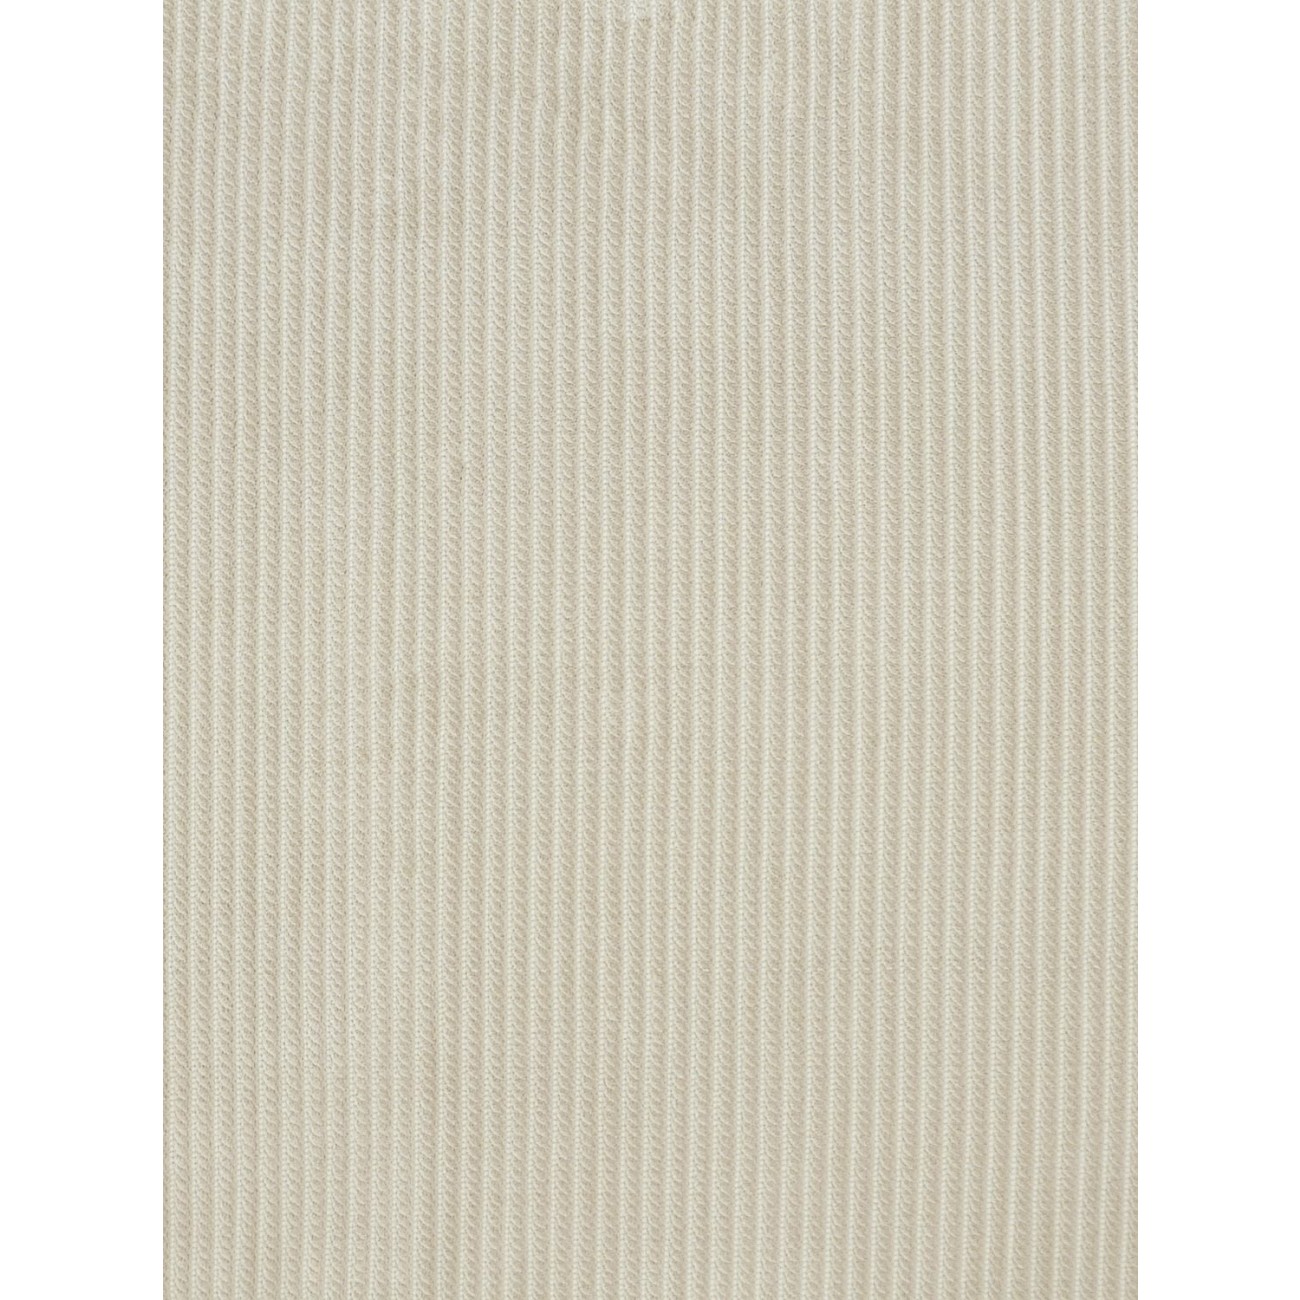 Tapete Grego Creme - 250x300